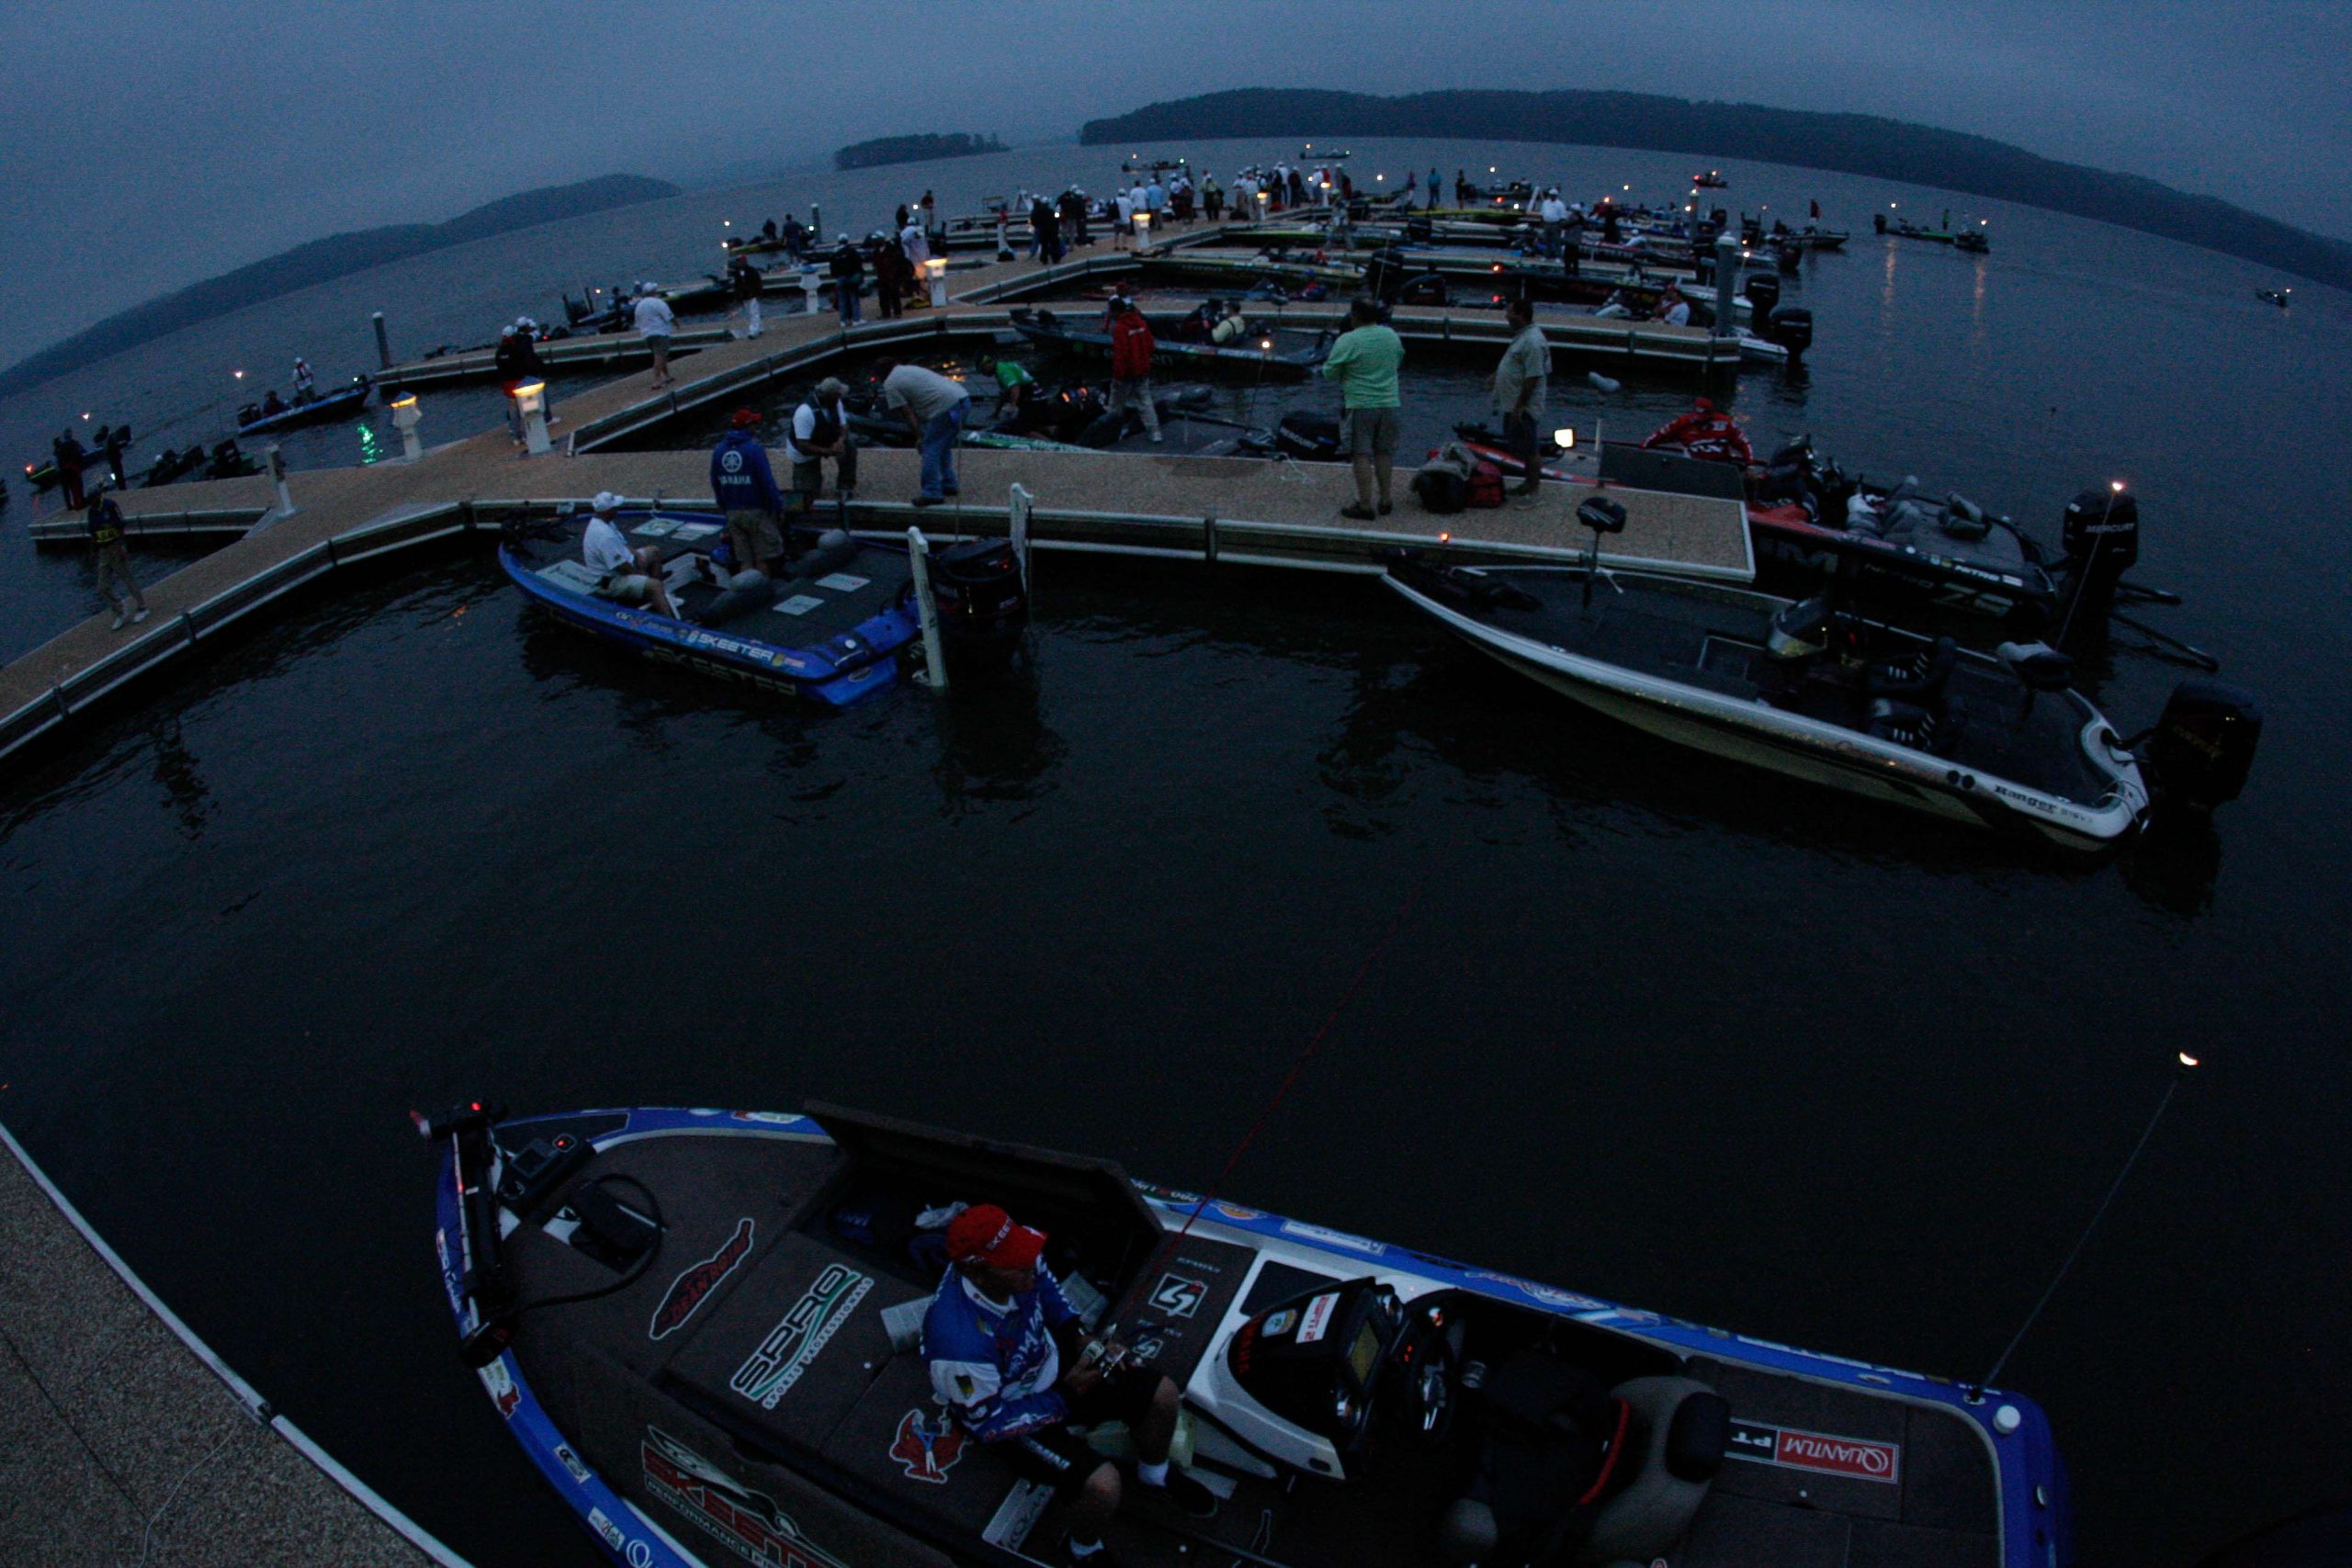 Traditionally, the first day of a tournament results in the biggest bass and the biggest average weight per bass, but Day 2 dawned brighter for the pros than did the first day.